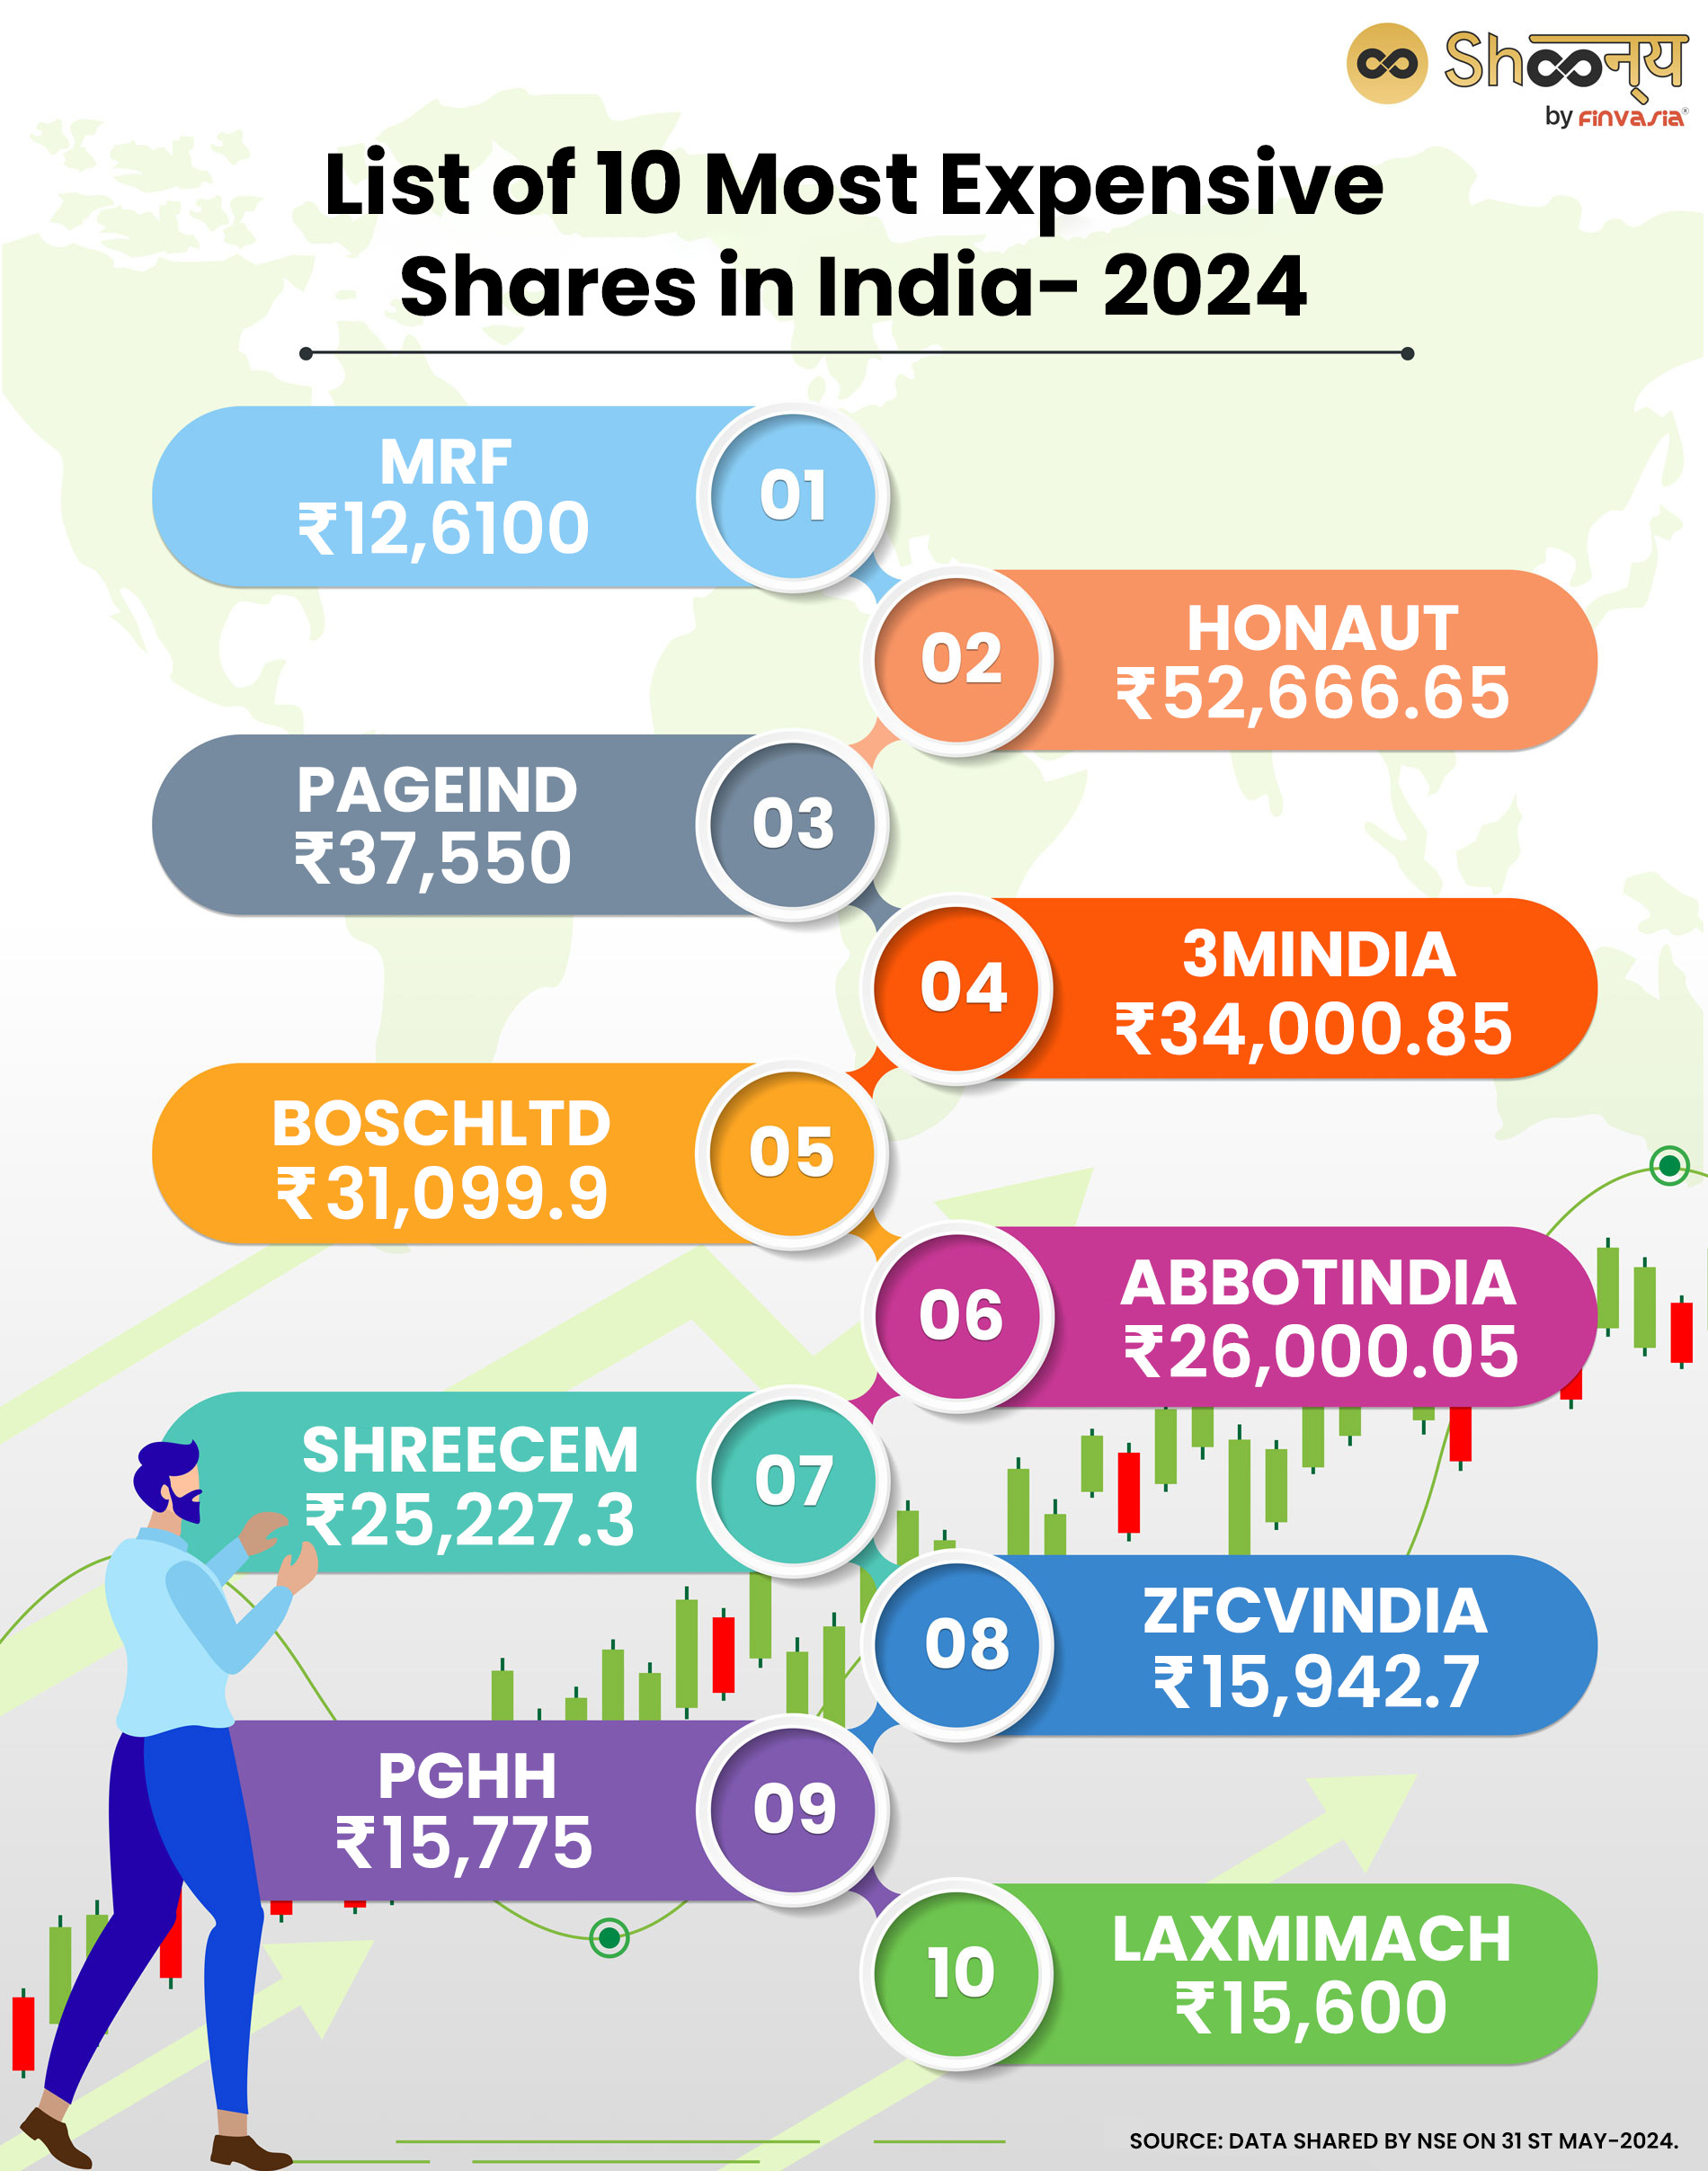 List of 10 Most Expensive Shares in India- 2024